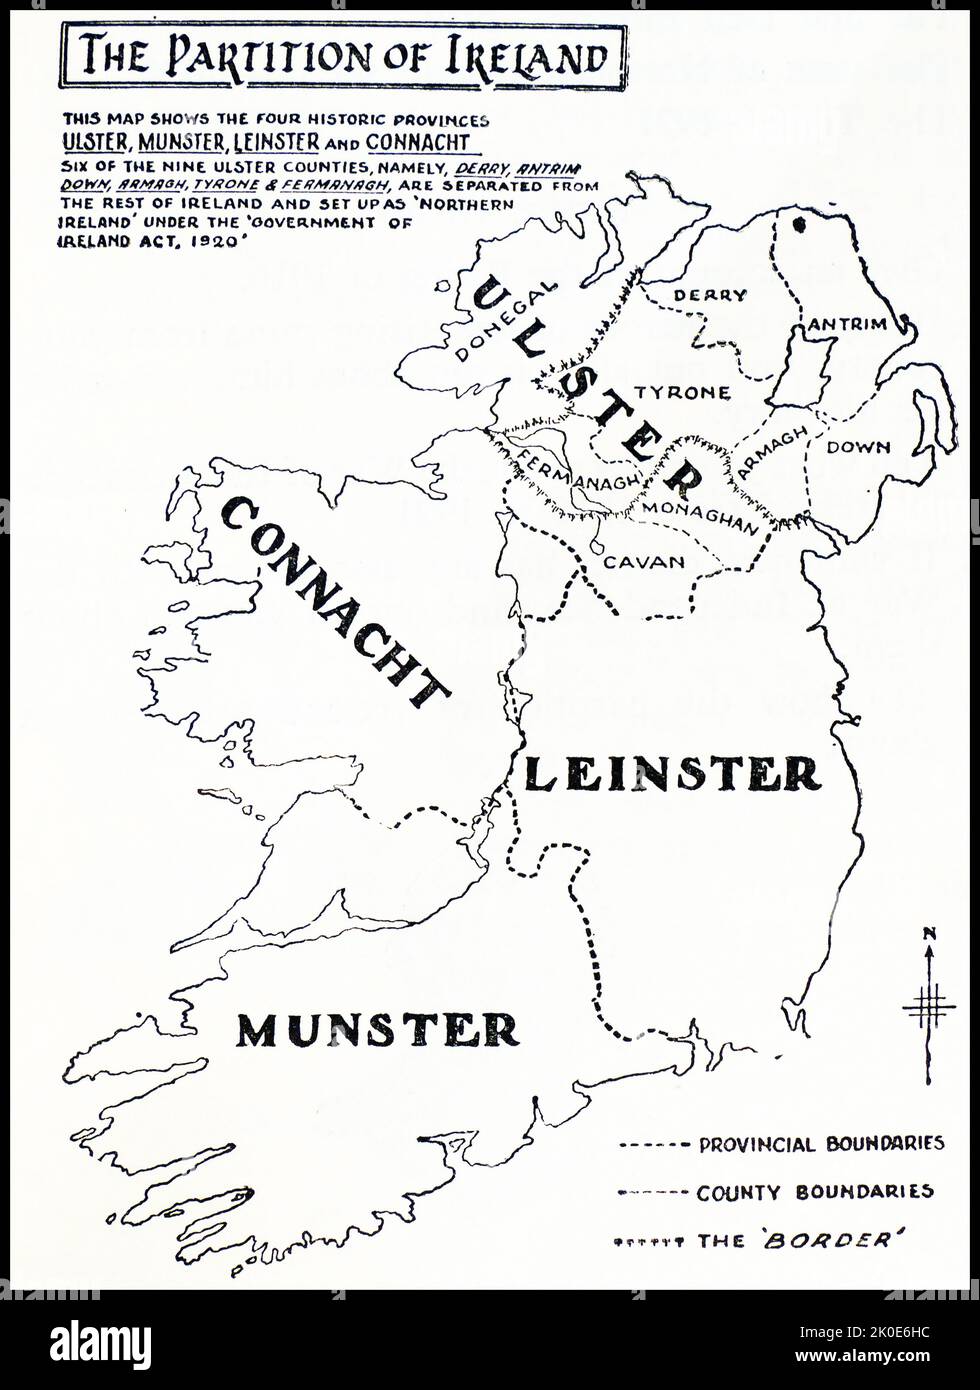 Map showing the partition of Ireland which led to Ireland being separated into two self-governing polities: Northern Ireland and Southern Ireland. It was enacted on 3 May 1921 under the Government of Ireland Act 1920. Stock Photo